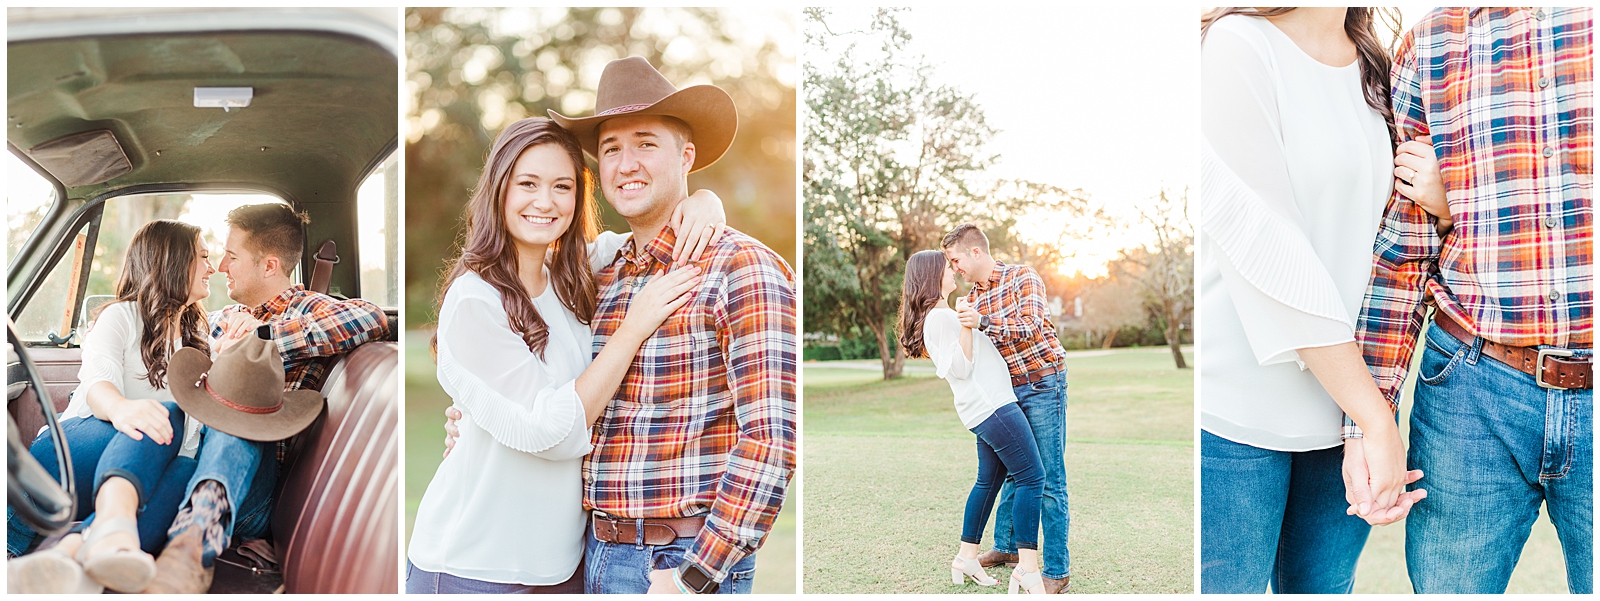 engagement session mobile alabama jennie tewell 1 0001